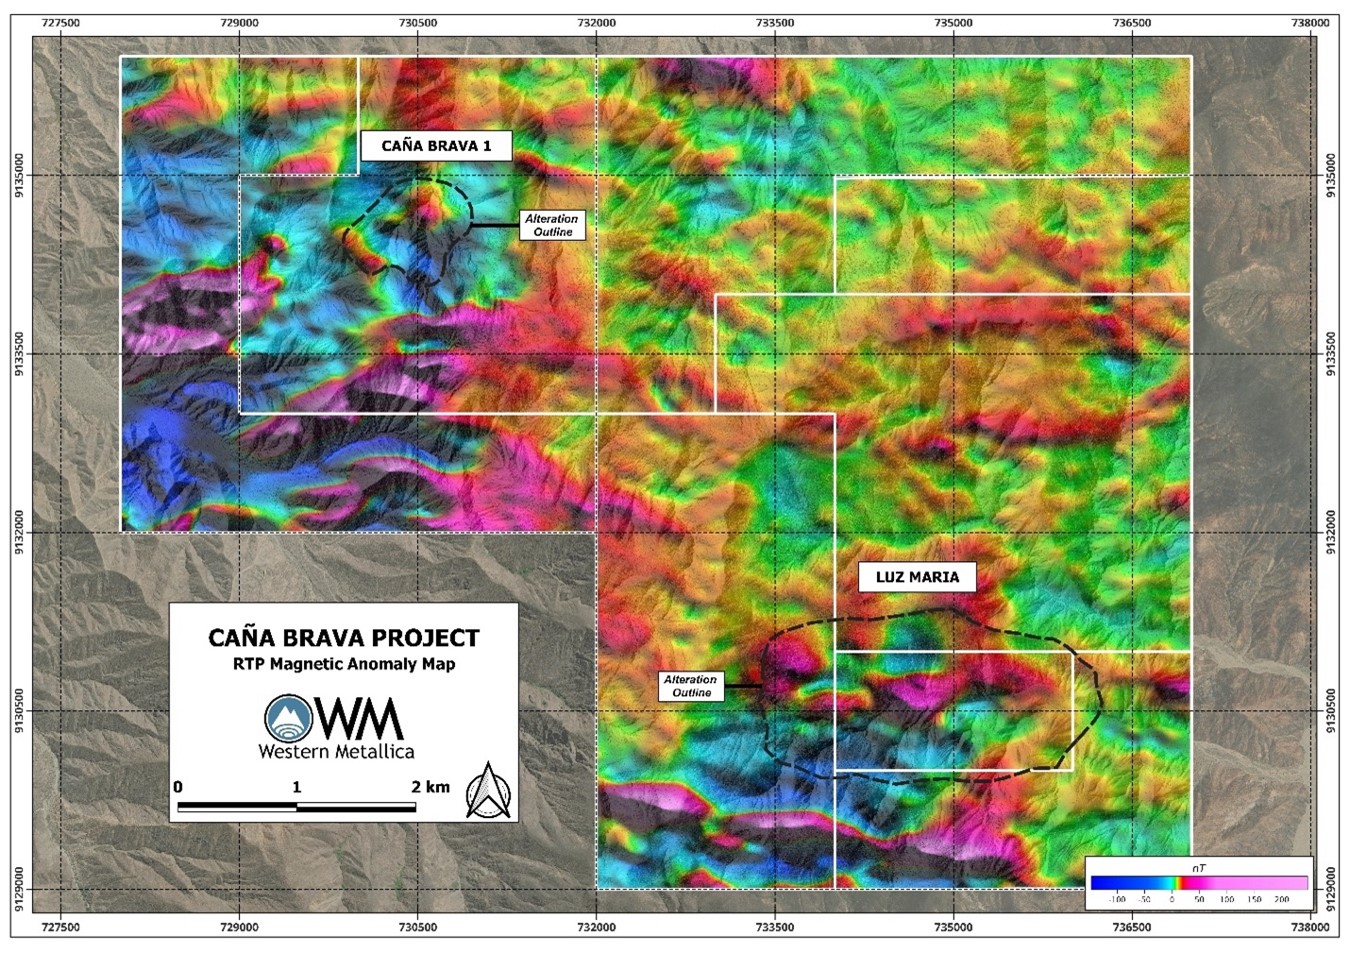 Caña Brava Project: drone-borne RTP magnetic anomaly map showing the alteration footprints over Caña Brava 1 and Luz Maria.